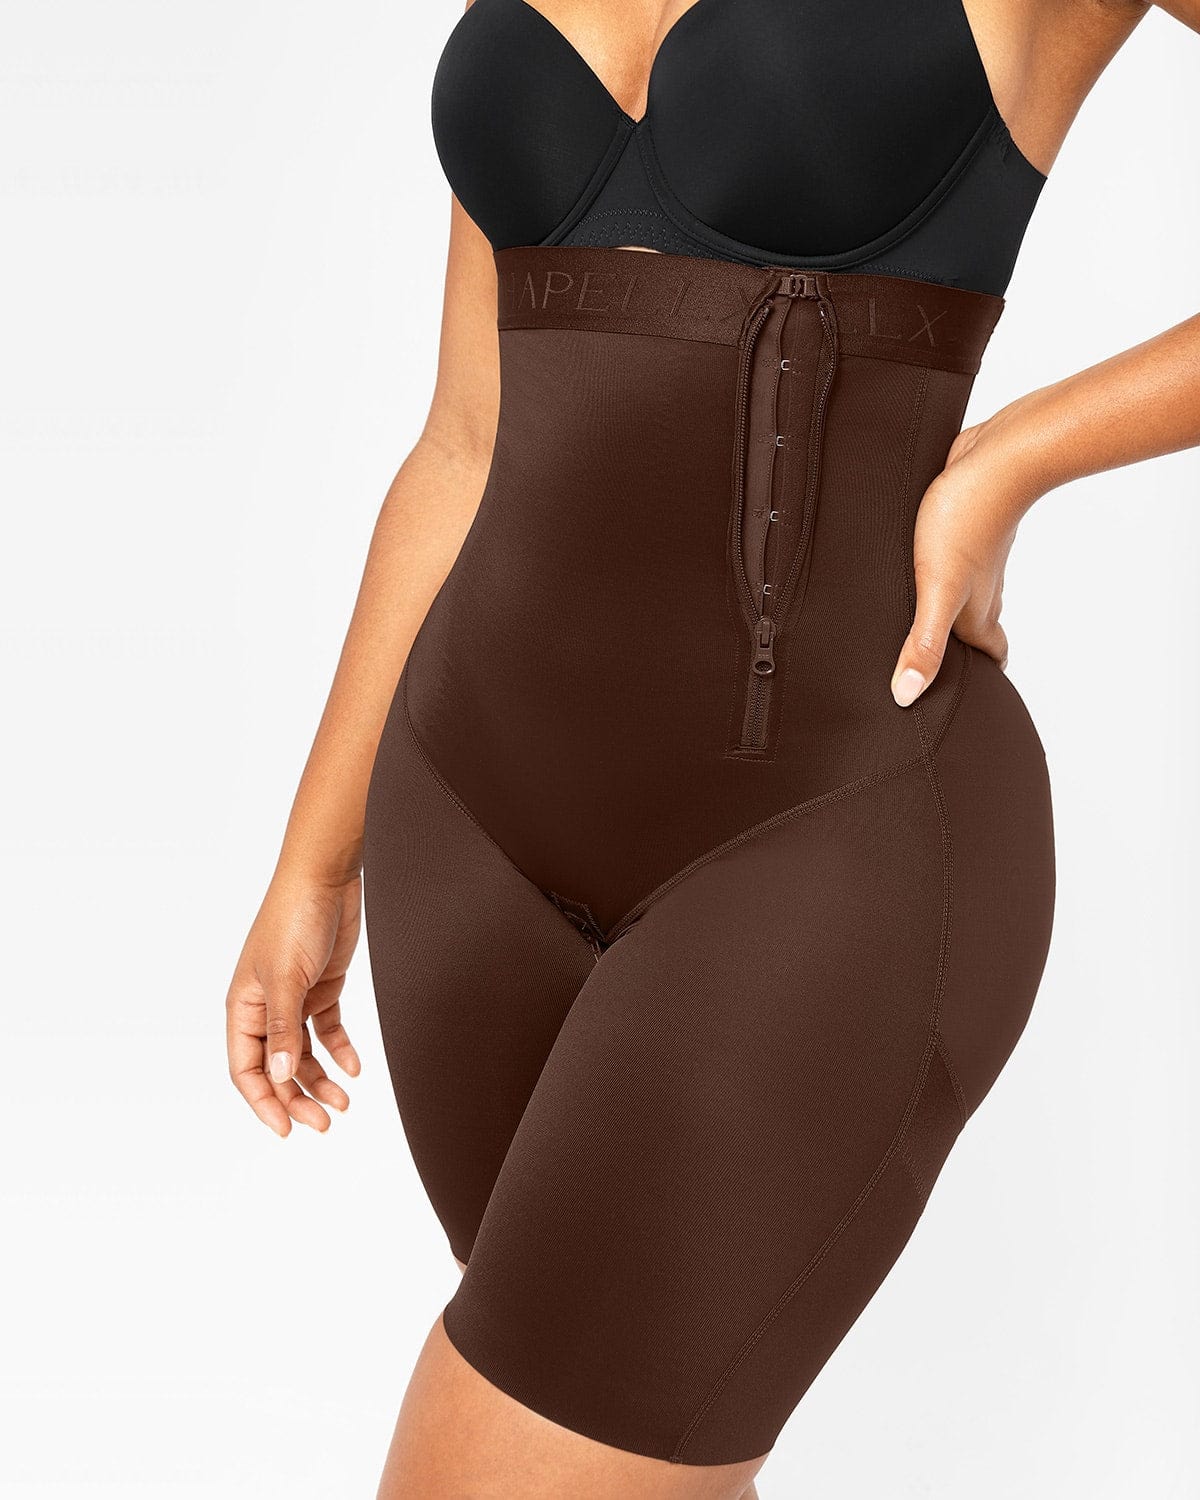 AirSlim® 2-In-1 High-Waisted Booty Lift Shaper Shorts in Beige & Black 5XL  fit Myasia well!! Link in bio:  #Shapellx, By  ShapellxOfficial